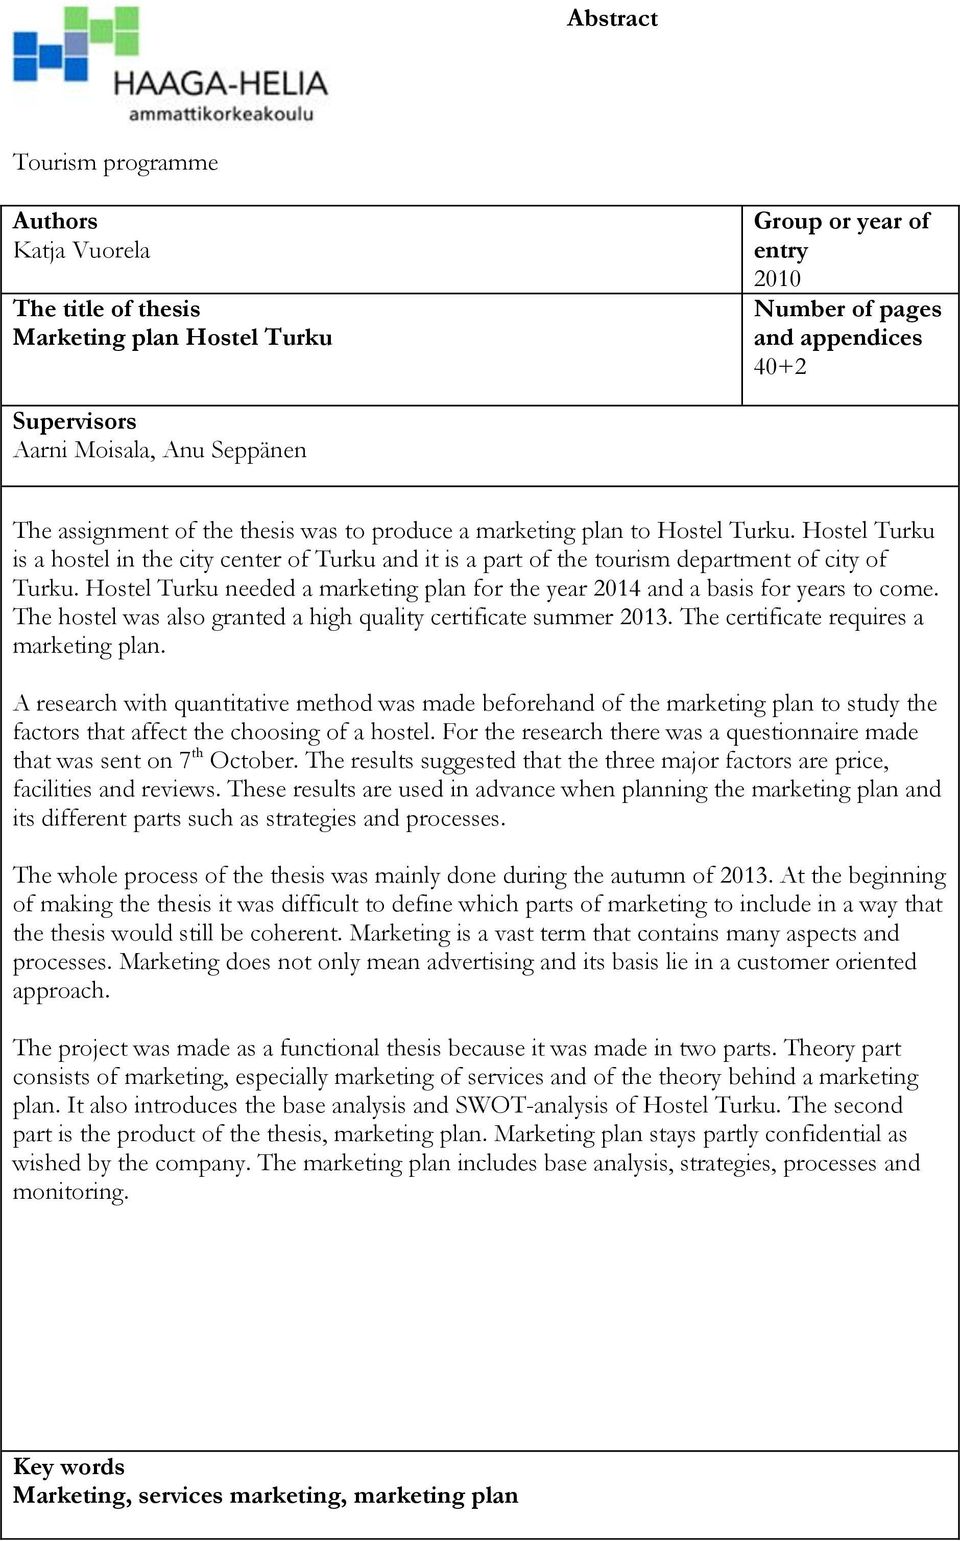 Hostel Turku needed a marketing plan for the year 2014 and a basis for years to come. The hostel was also granted a high quality certificate summer 2013. The certificate requires a marketing plan.